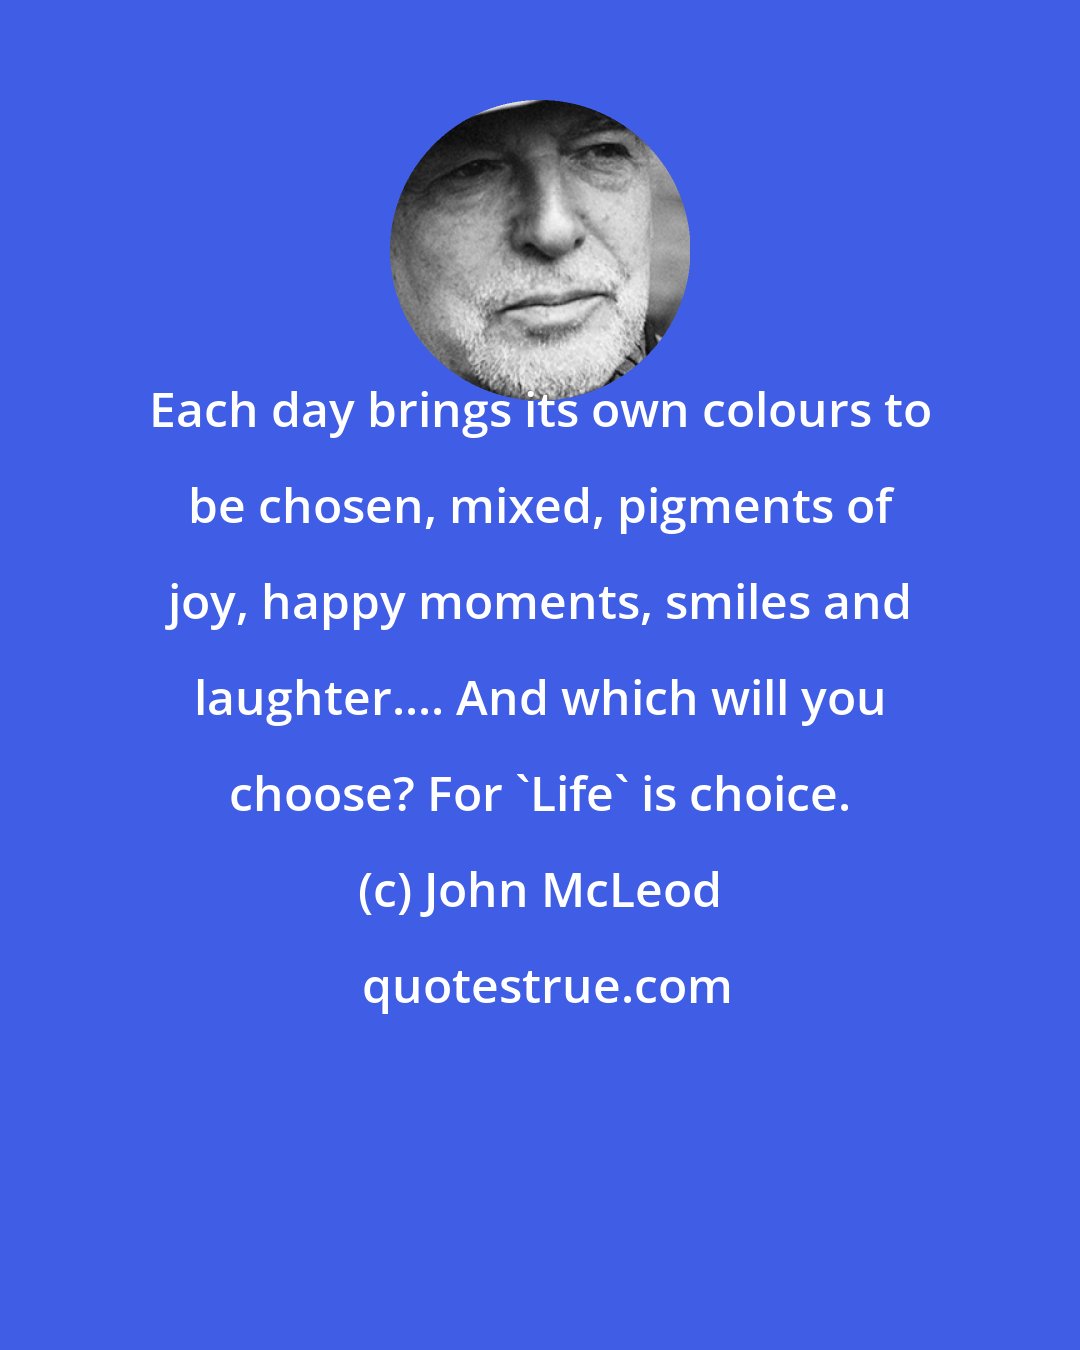 John McLeod: Each day brings its own colours to be chosen, mixed, pigments of joy, happy moments, smiles and laughter.... And which will you choose? For 'Life' is choice.